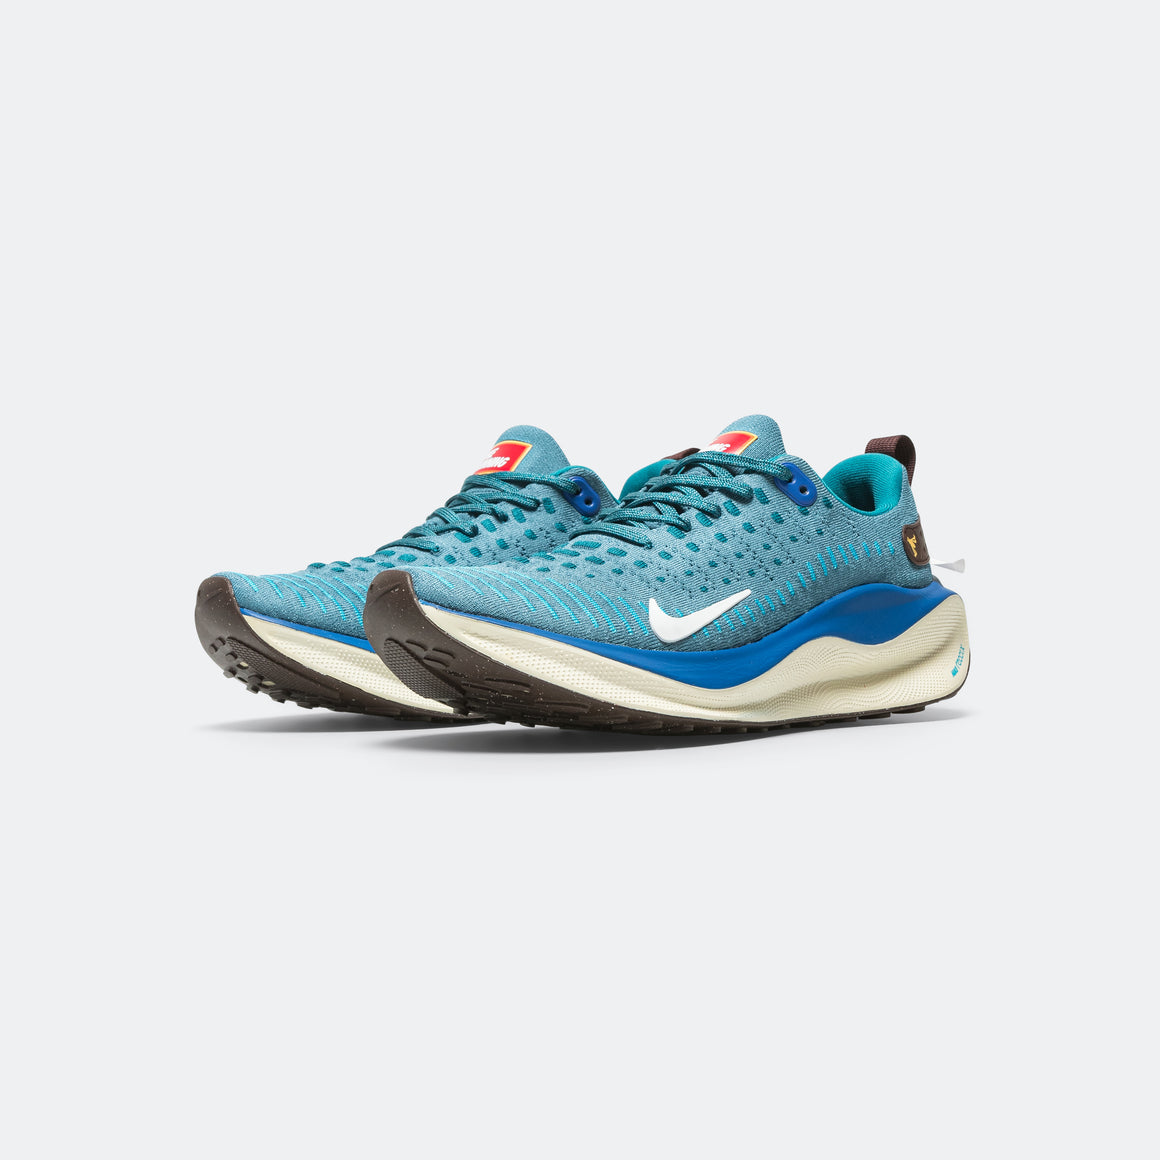 Nike - Mens ReactX Infinity Run 4 - Noise Aqua/White-Geode Teal-Earth - Up There Athletics